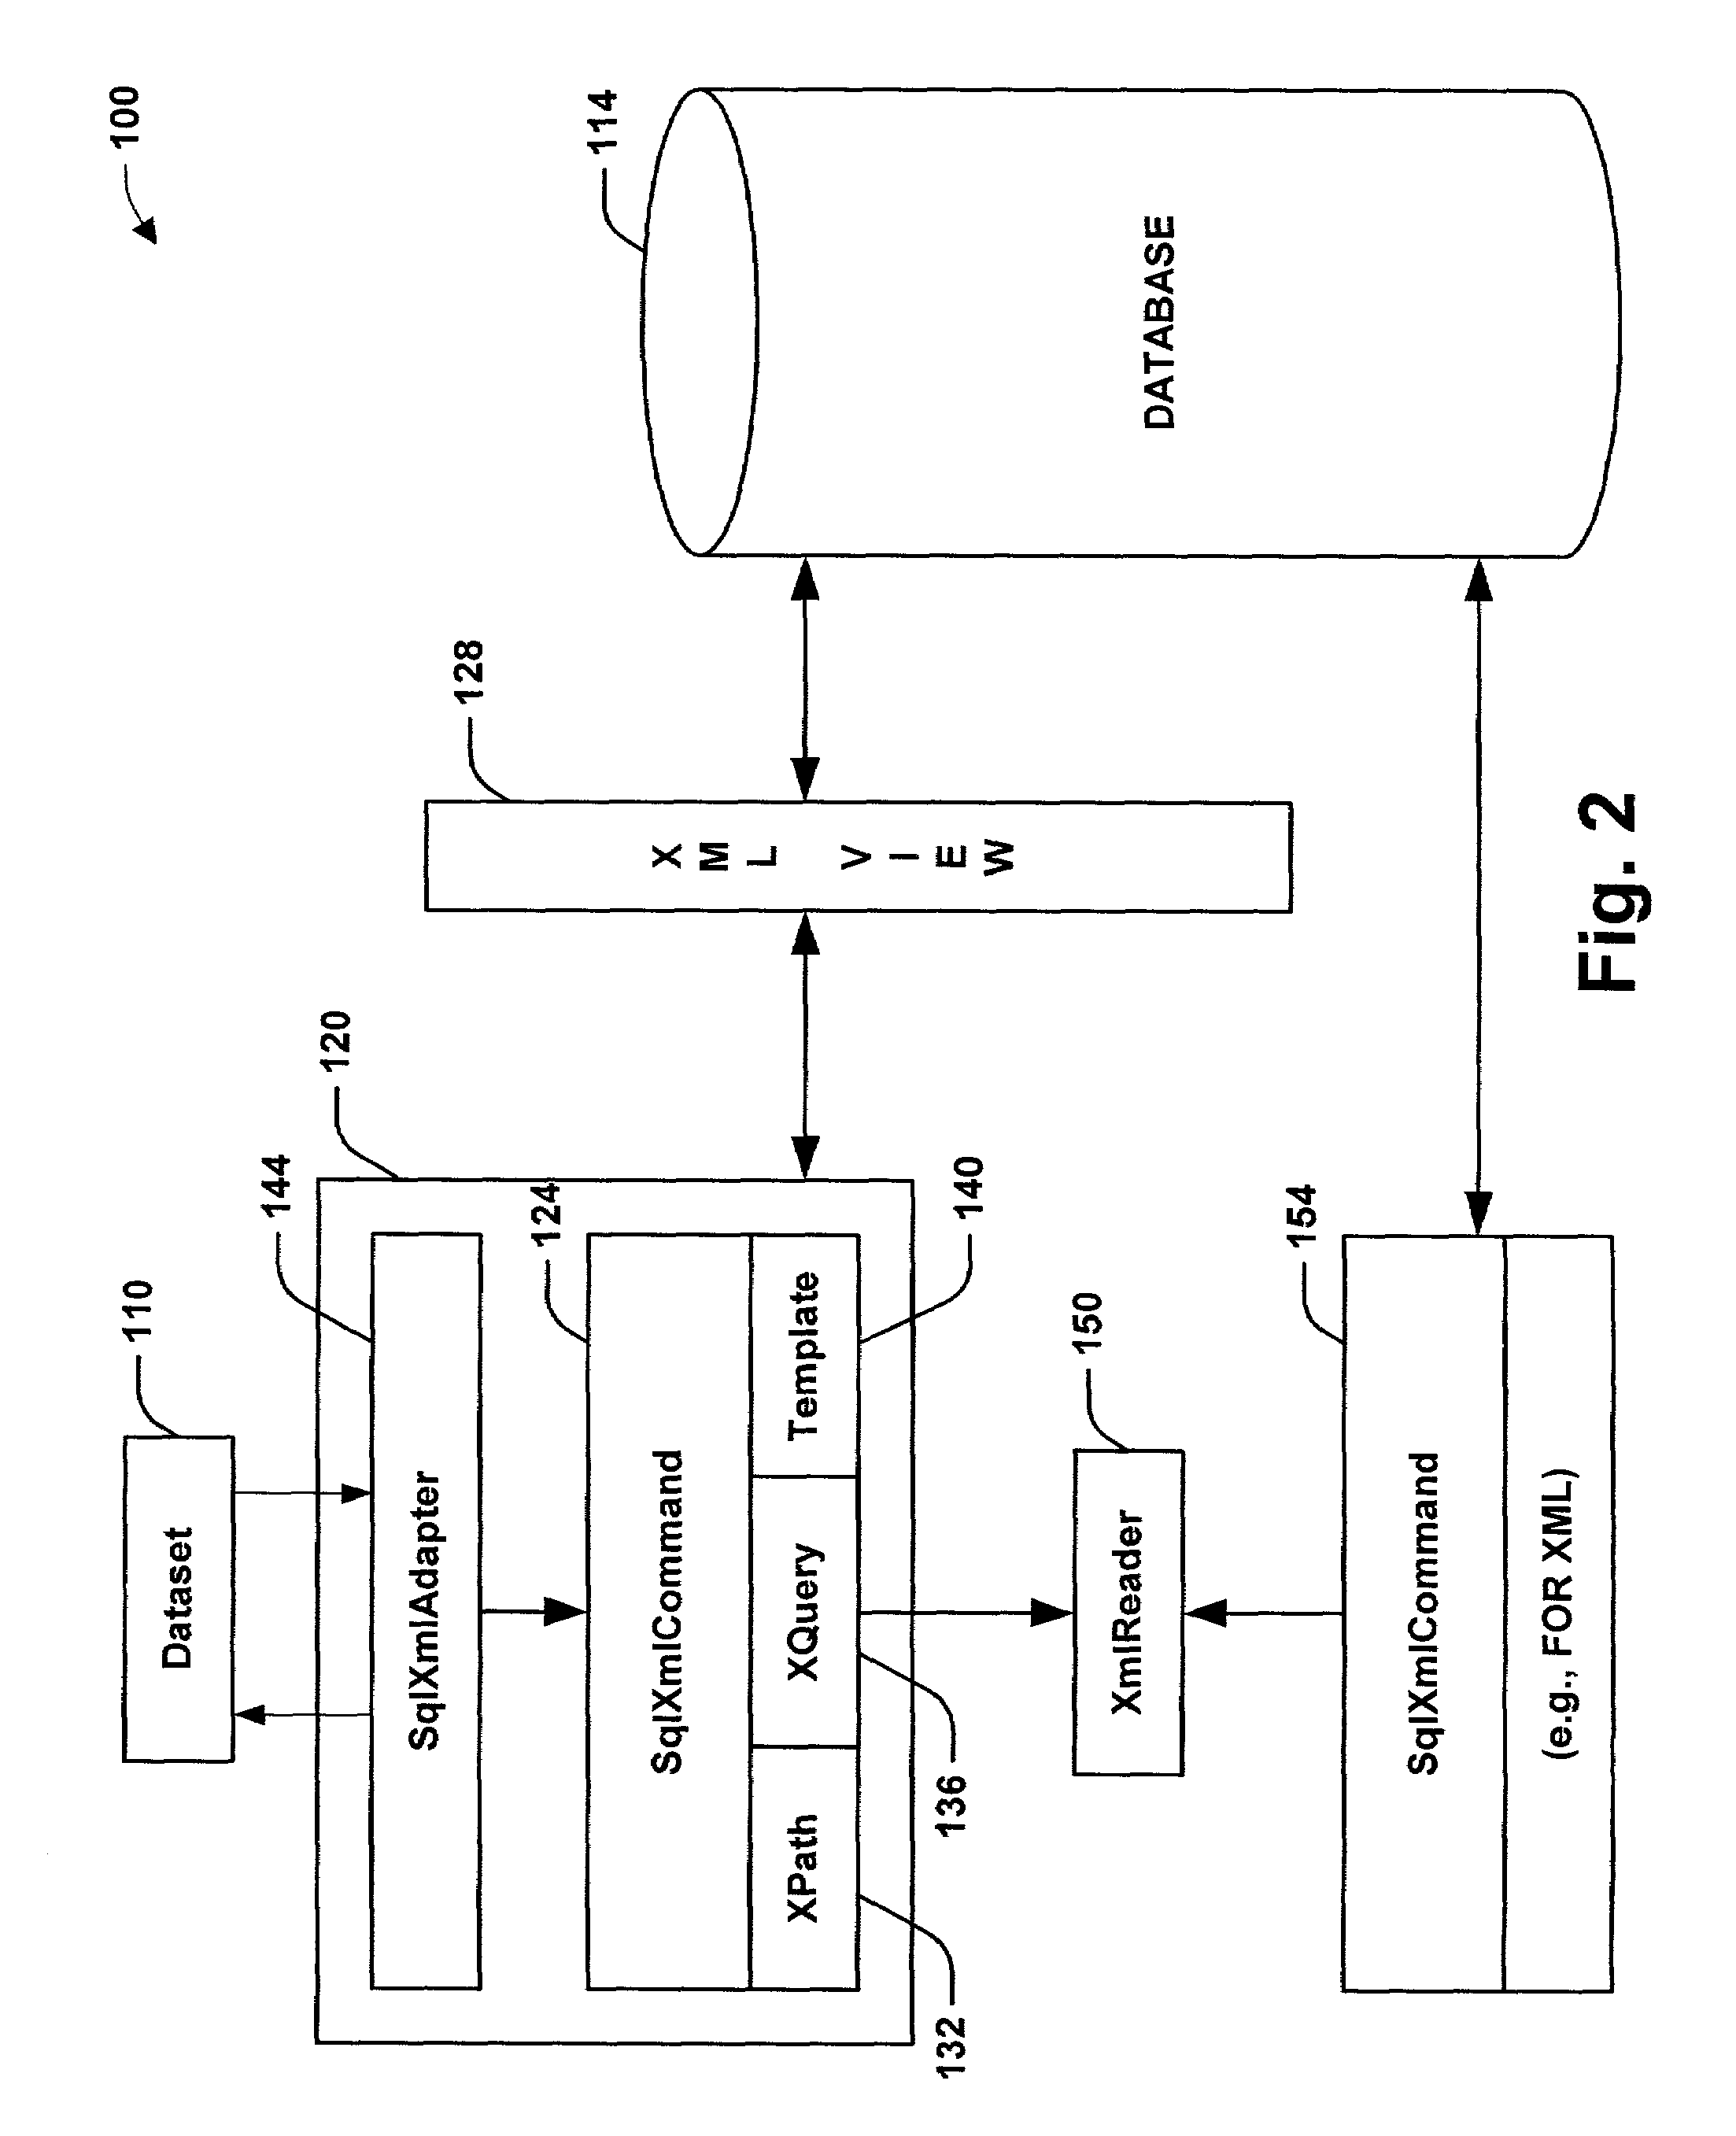 System and method providing API interface between XML and SQL while interacting with a managed object environment